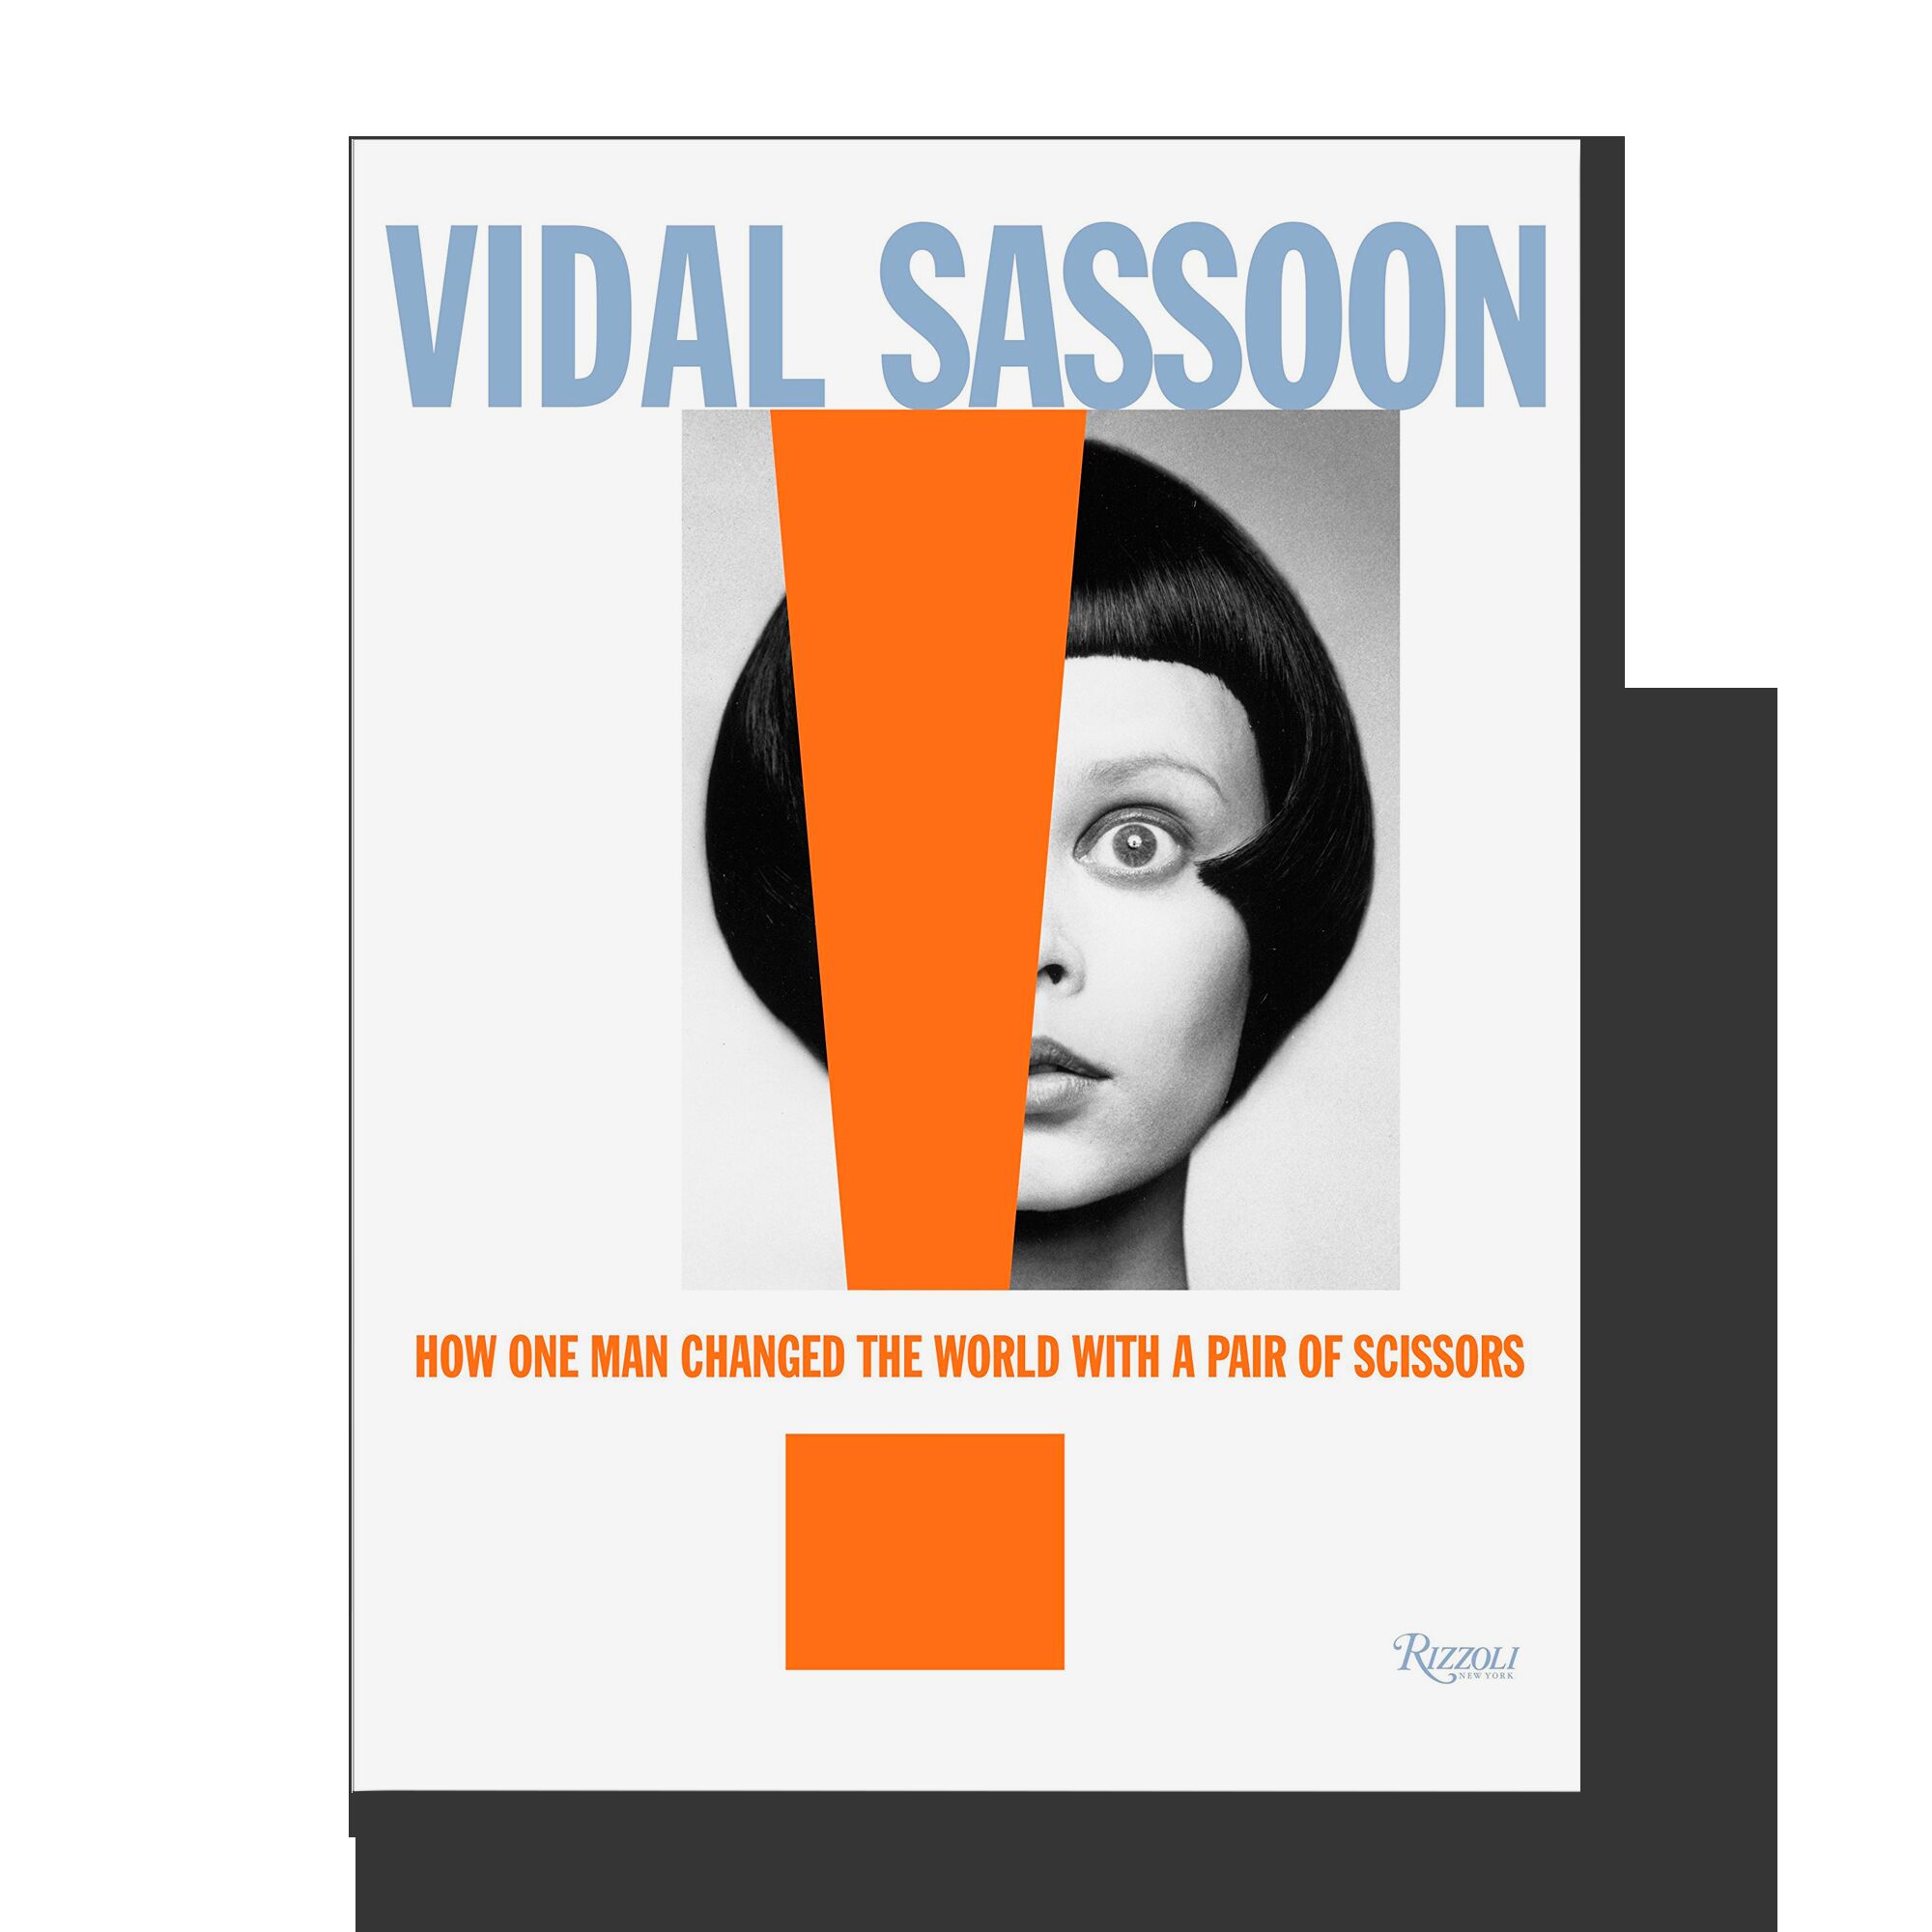 Vidal Sassoon: How One Man Changed the World with a Pair of Scissors